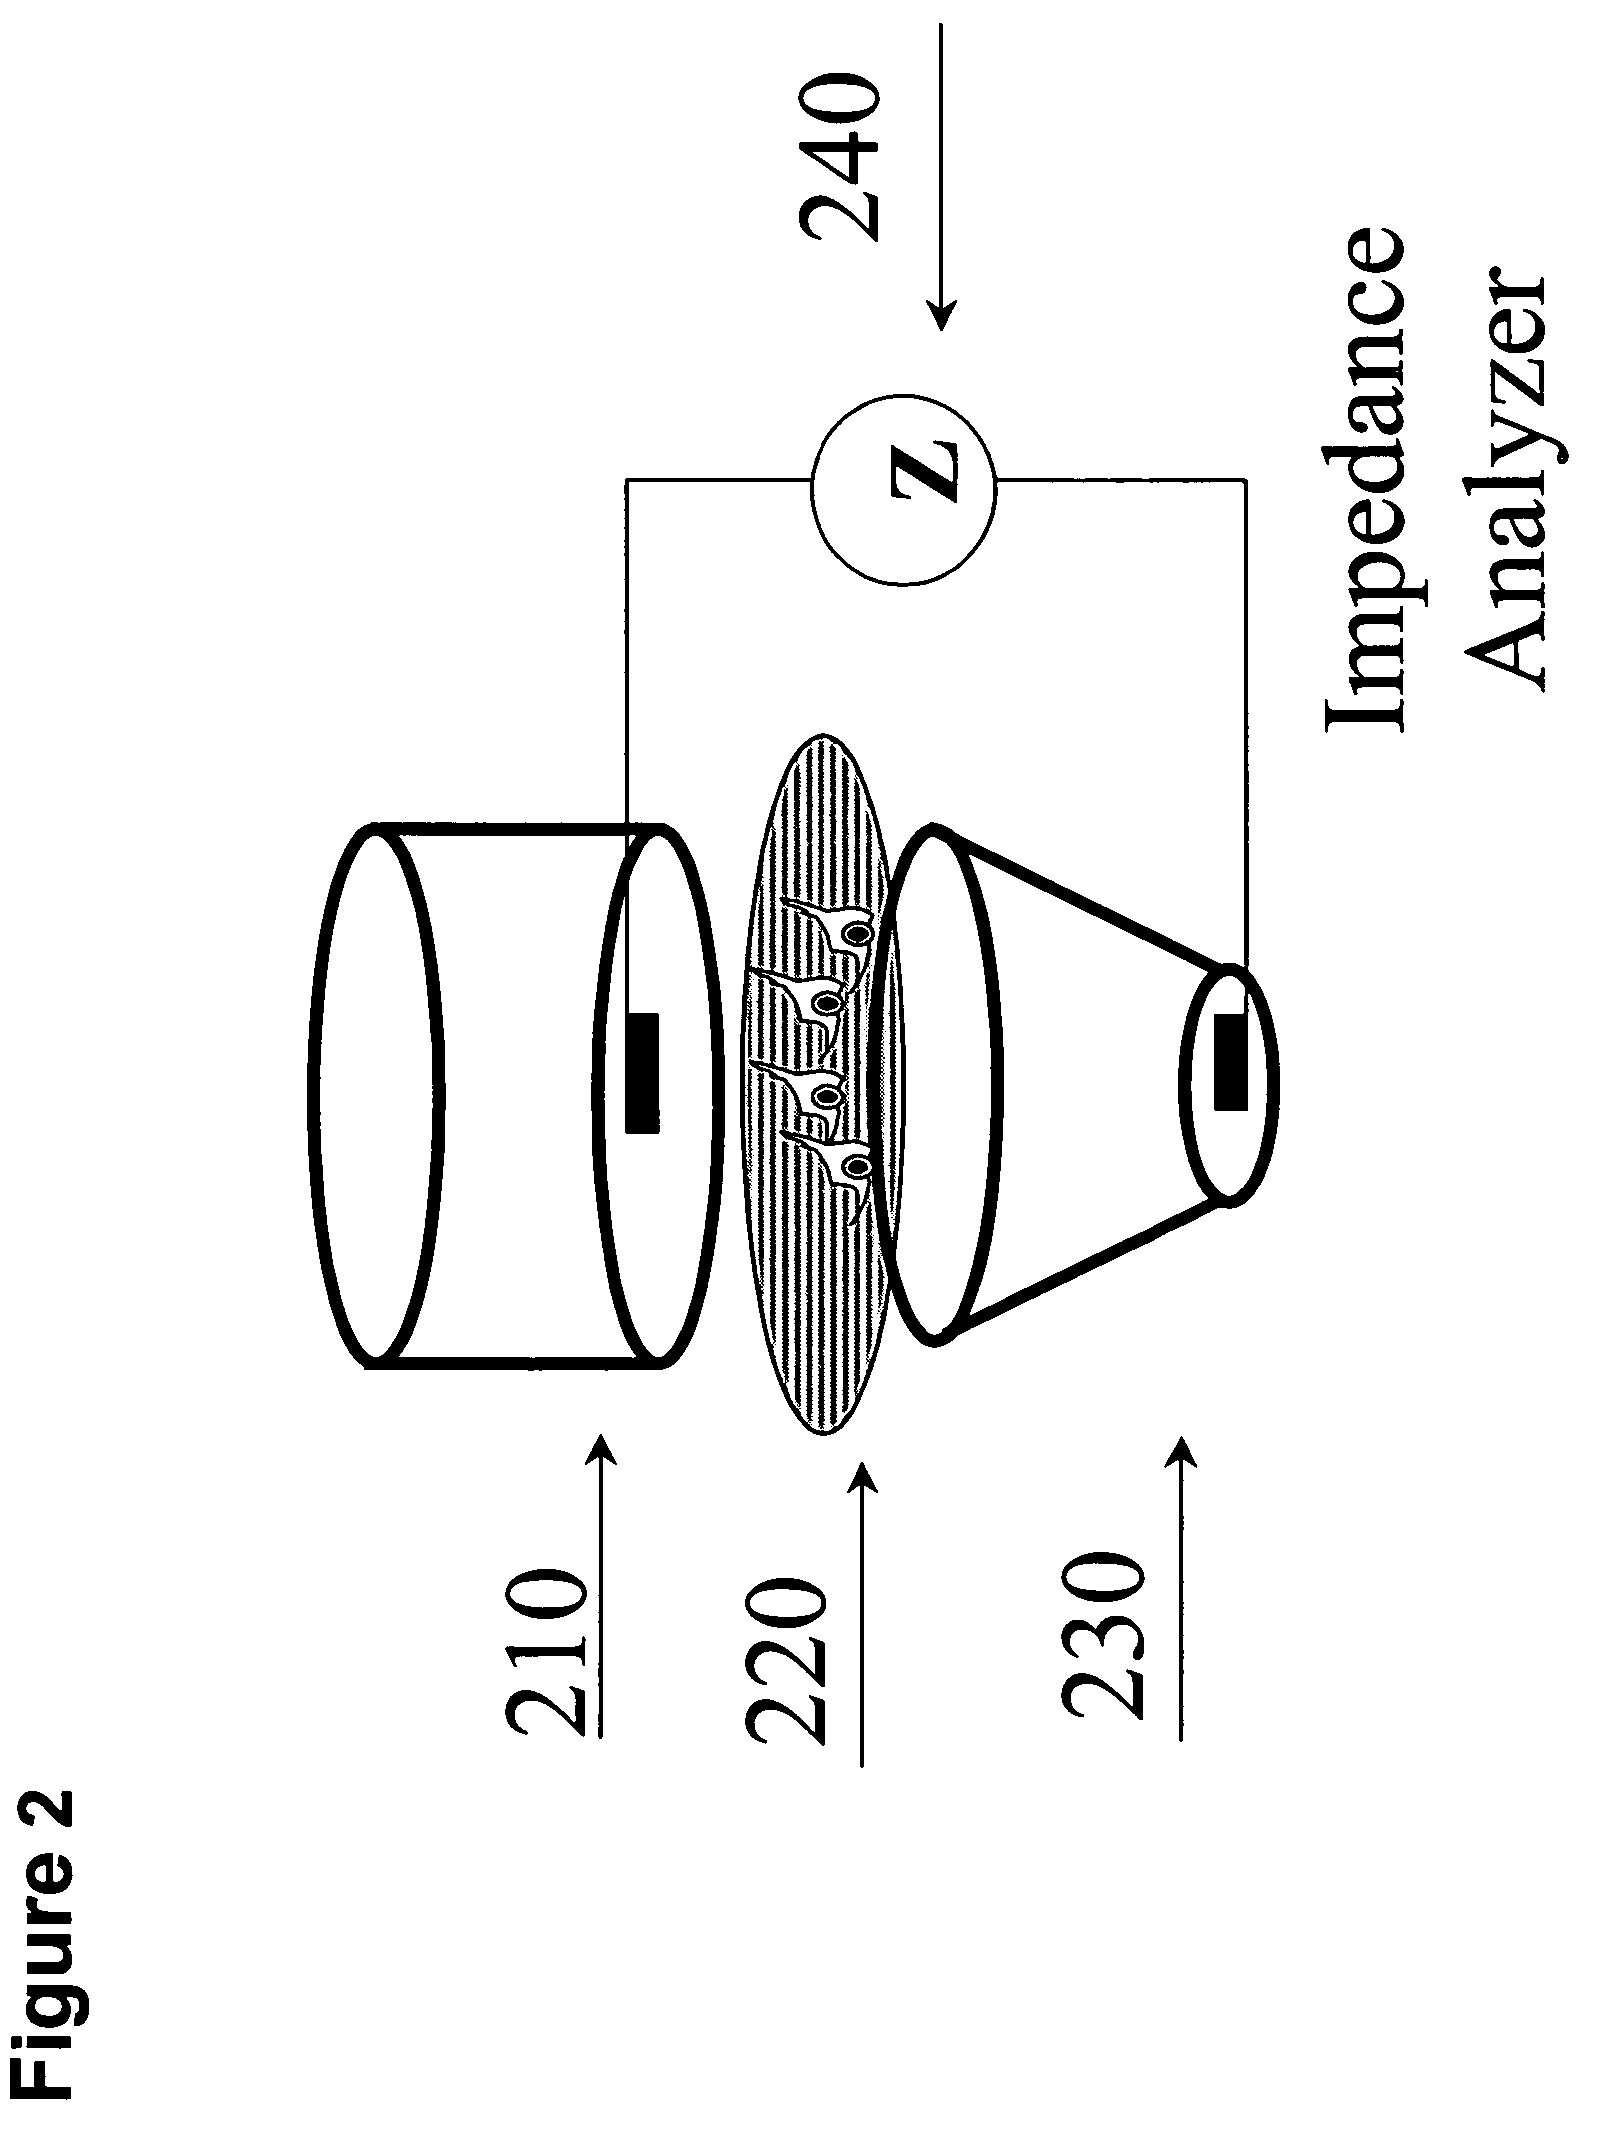 Impedance based apparatuses and methods for analyzing cells and particles